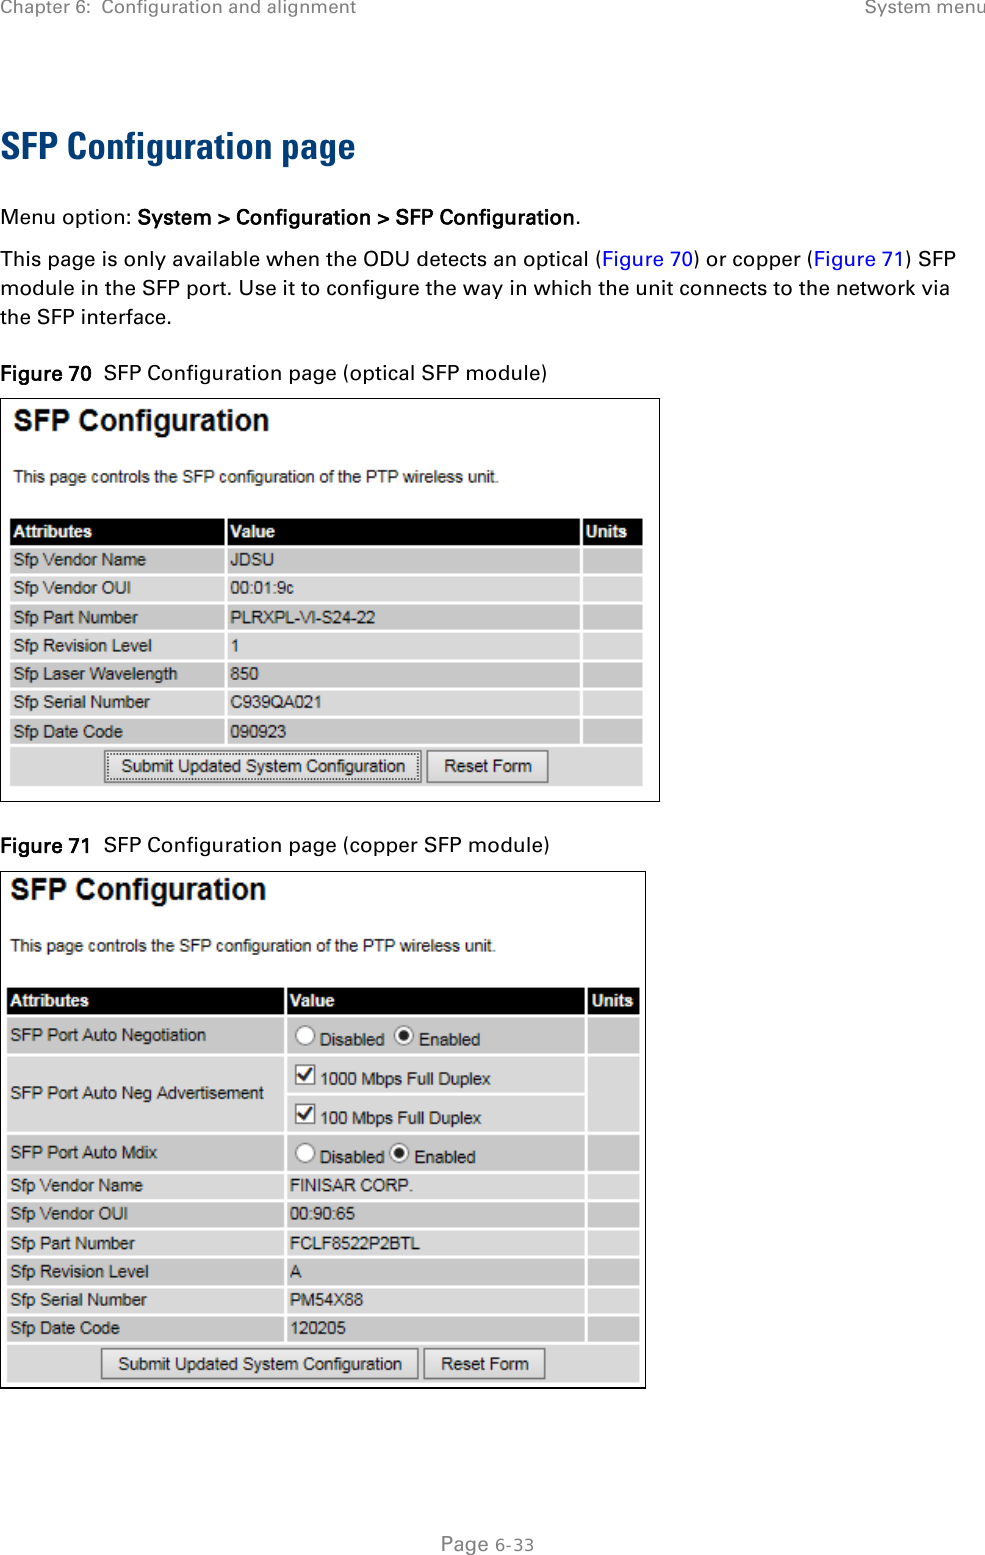 Chapter 6:  Configuration and alignment System menu  SFP Configuration page Menu option: System &gt; Configuration &gt; SFP Configuration. This page is only available when the ODU detects an optical (Figure 70) or copper (Figure 71) SFP module in the SFP port. Use it to configure the way in which the unit connects to the network via the SFP interface.   Figure 70  SFP Configuration page (optical SFP module)  Figure 71  SFP Configuration page (copper SFP module)    Page 6-33 